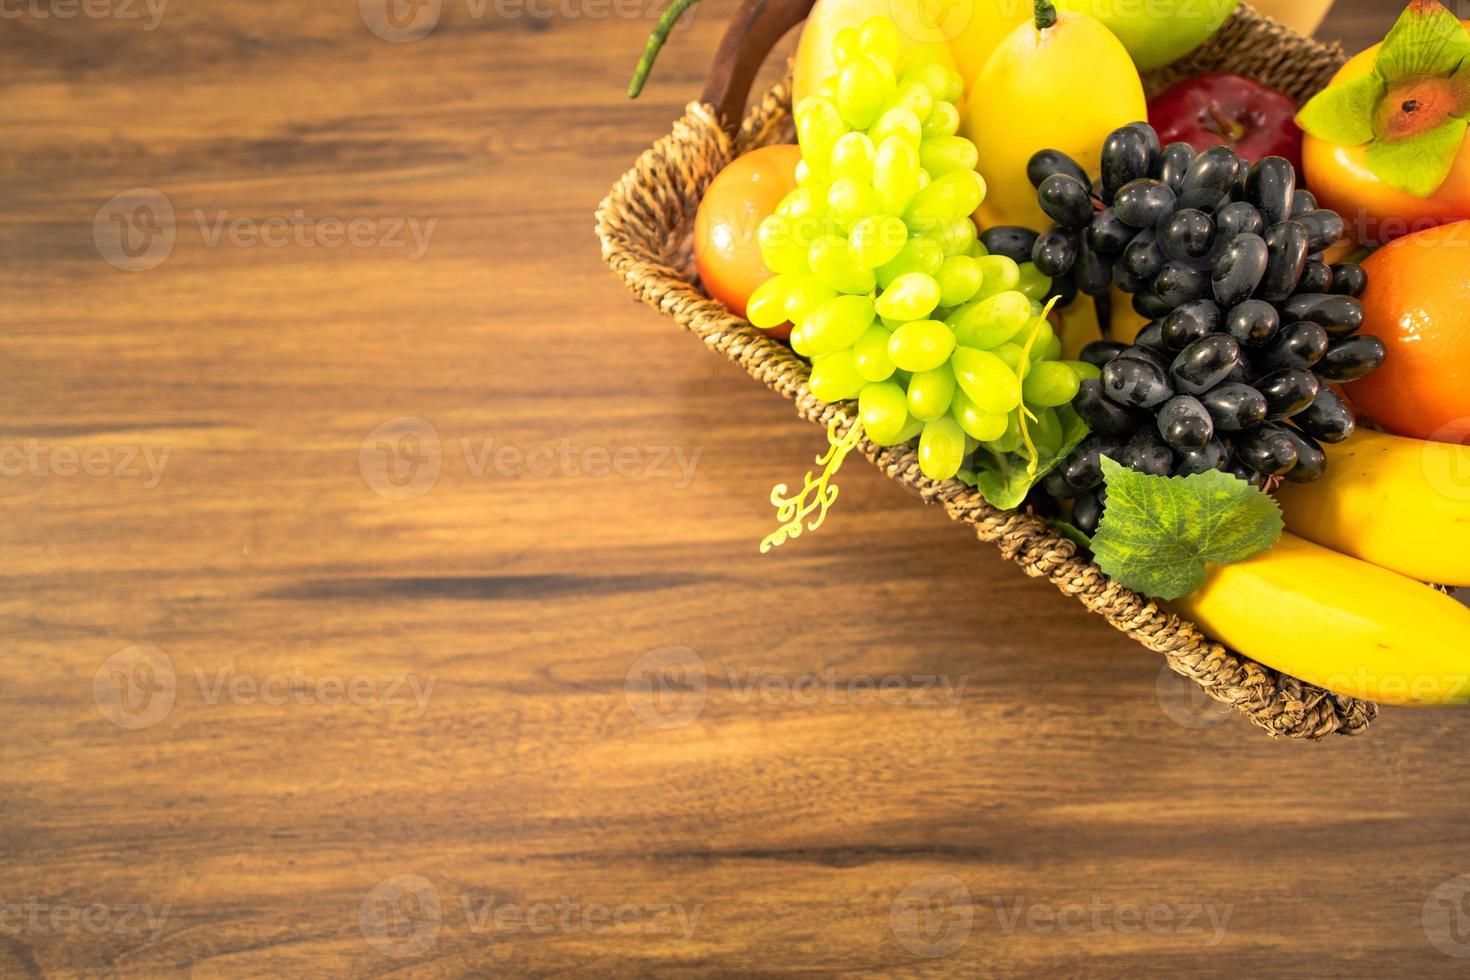 Vegetable for making salad and fruits in basket on table photo